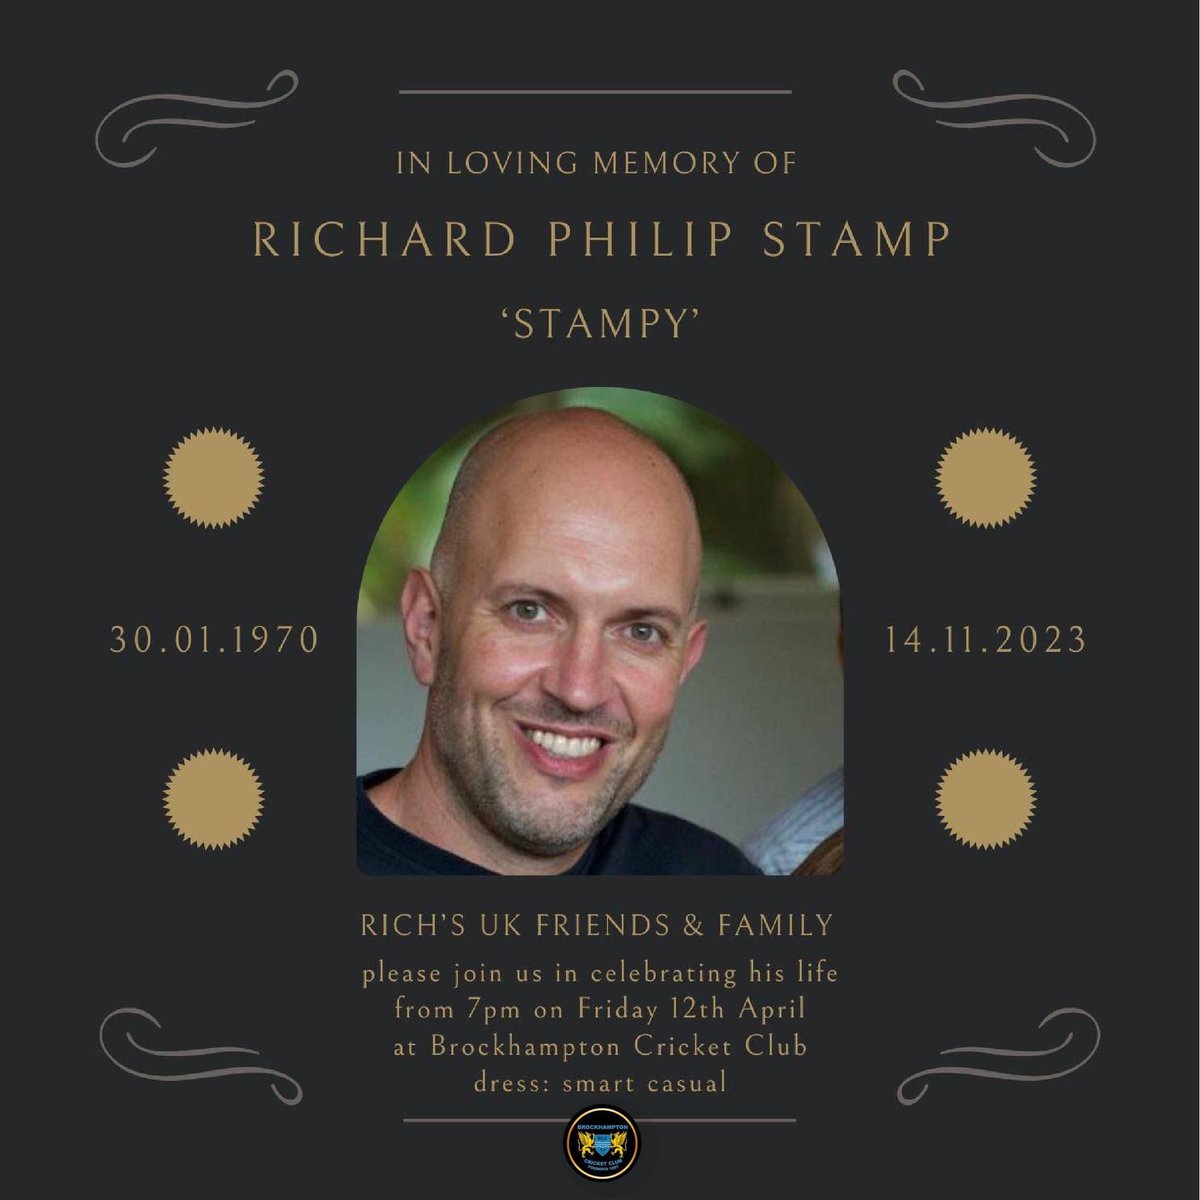 Please join us, at Brockhampton Cricket Club from 7pm on Friday 12th April, to celebrate Richard's life.